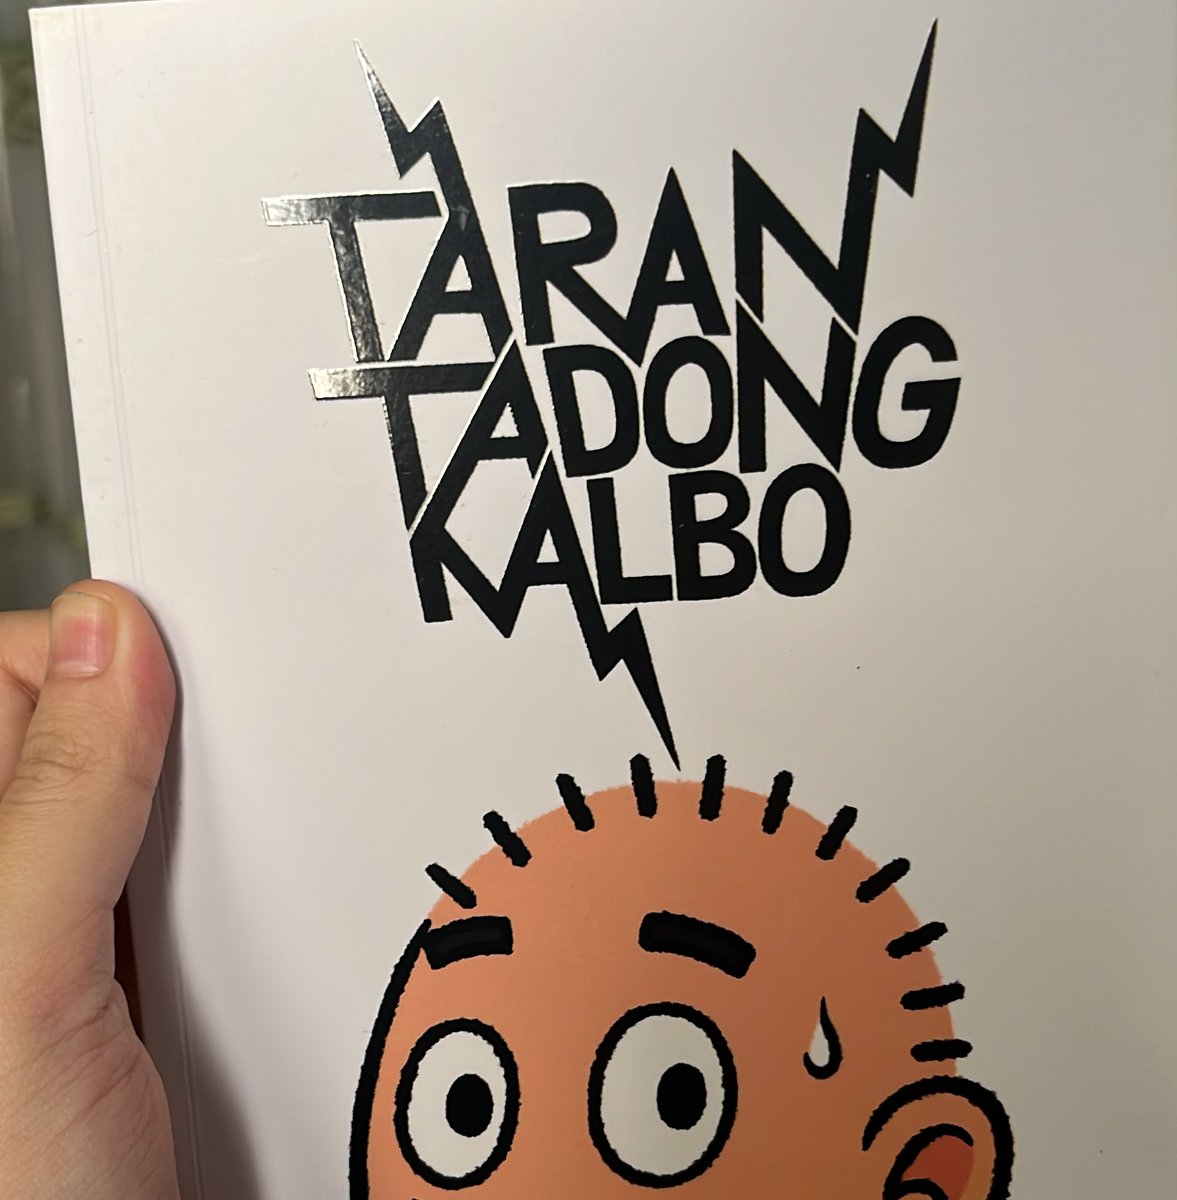 A newer generation and younger folk would be more familiar with @KevinKalbo (for MY folk: Kalbo = botak) and his work as 'Tarantadong Kalbo'. I mostly knew of his work from Facebook and Reddit shares, and since both of them were in the table behind mine, I had to also get books!